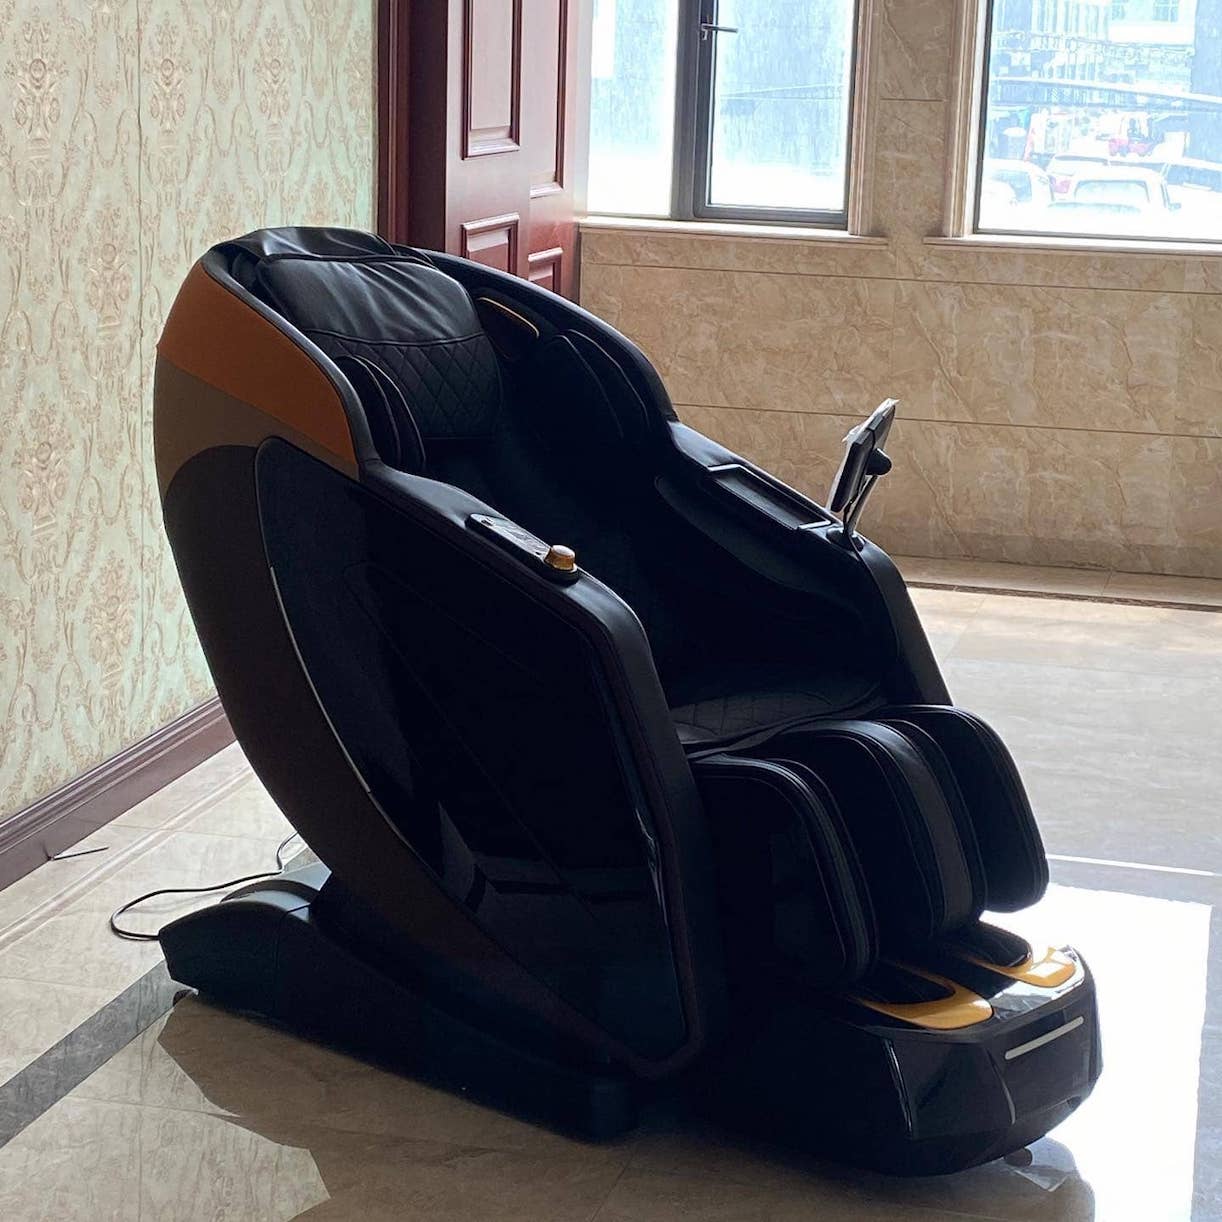 Massage Chair buyer's guide